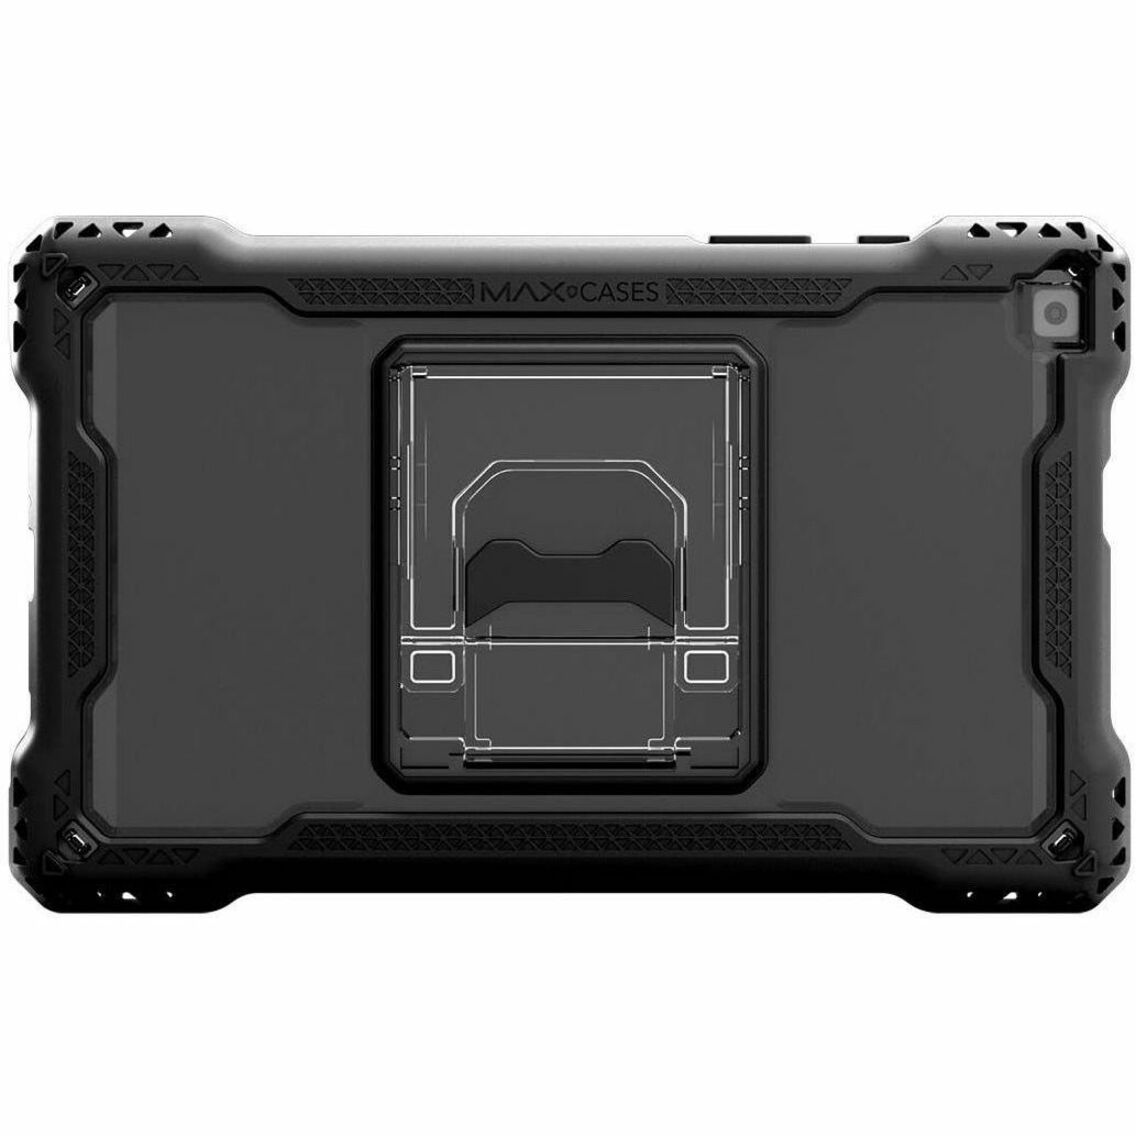 MAXCases SS-SXX-GT8-19B-BLK Shield Extreme-X for Samsung Galaxy Tab A 8" (2019 Model T-290/T-295), Impact Resistant, Drop Resistant, Scratch Resistant, Black